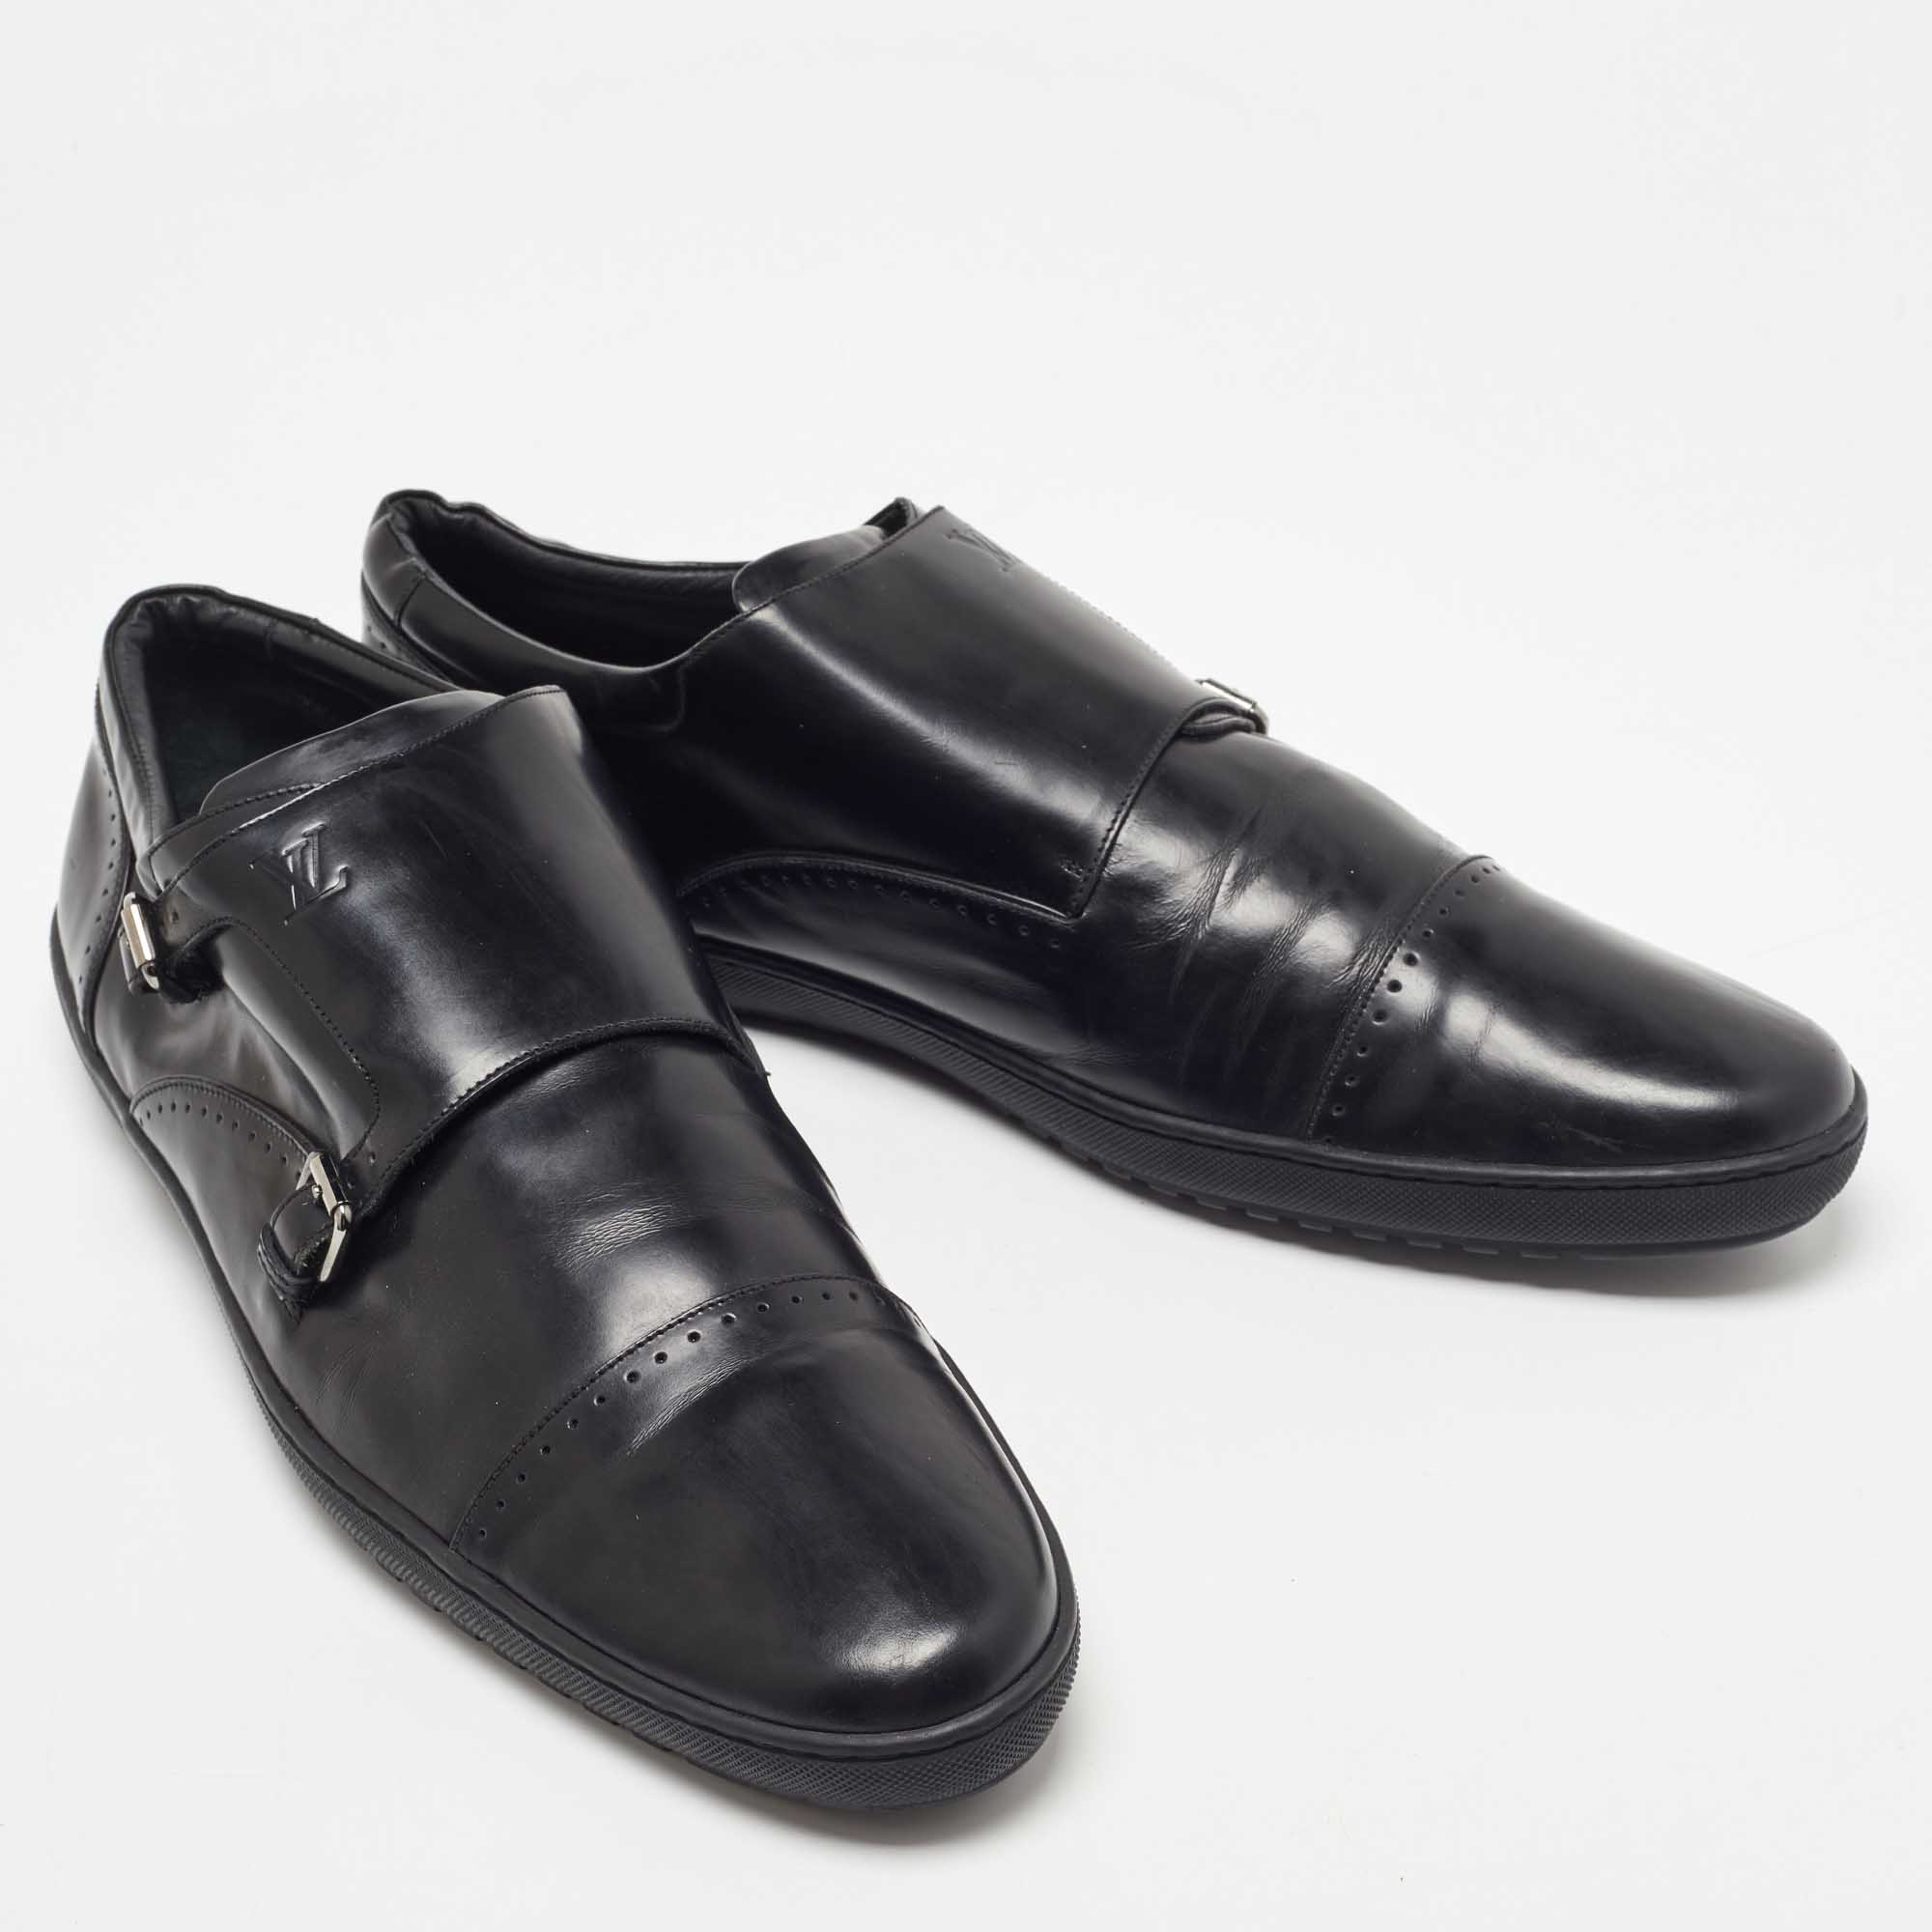 Louis Vuitton Black Leather Monk Strap Loafers Size 46